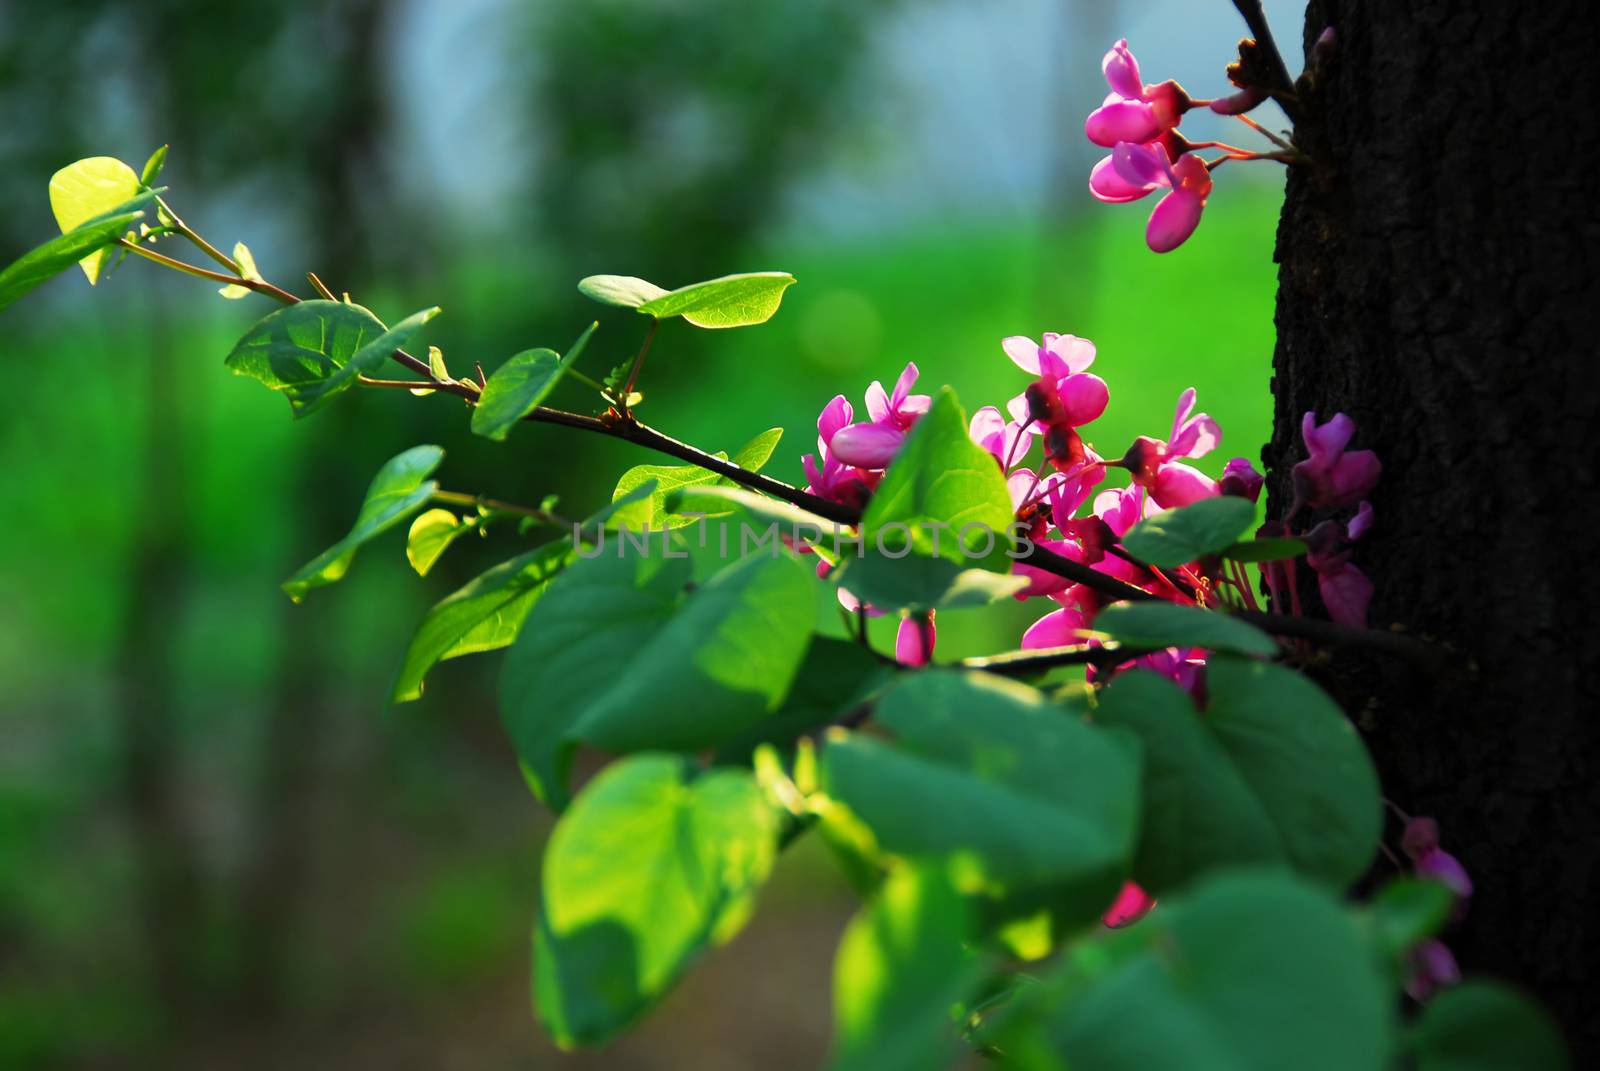 Cercis canadensis (eastern redbud) tree at spring with pink flowers